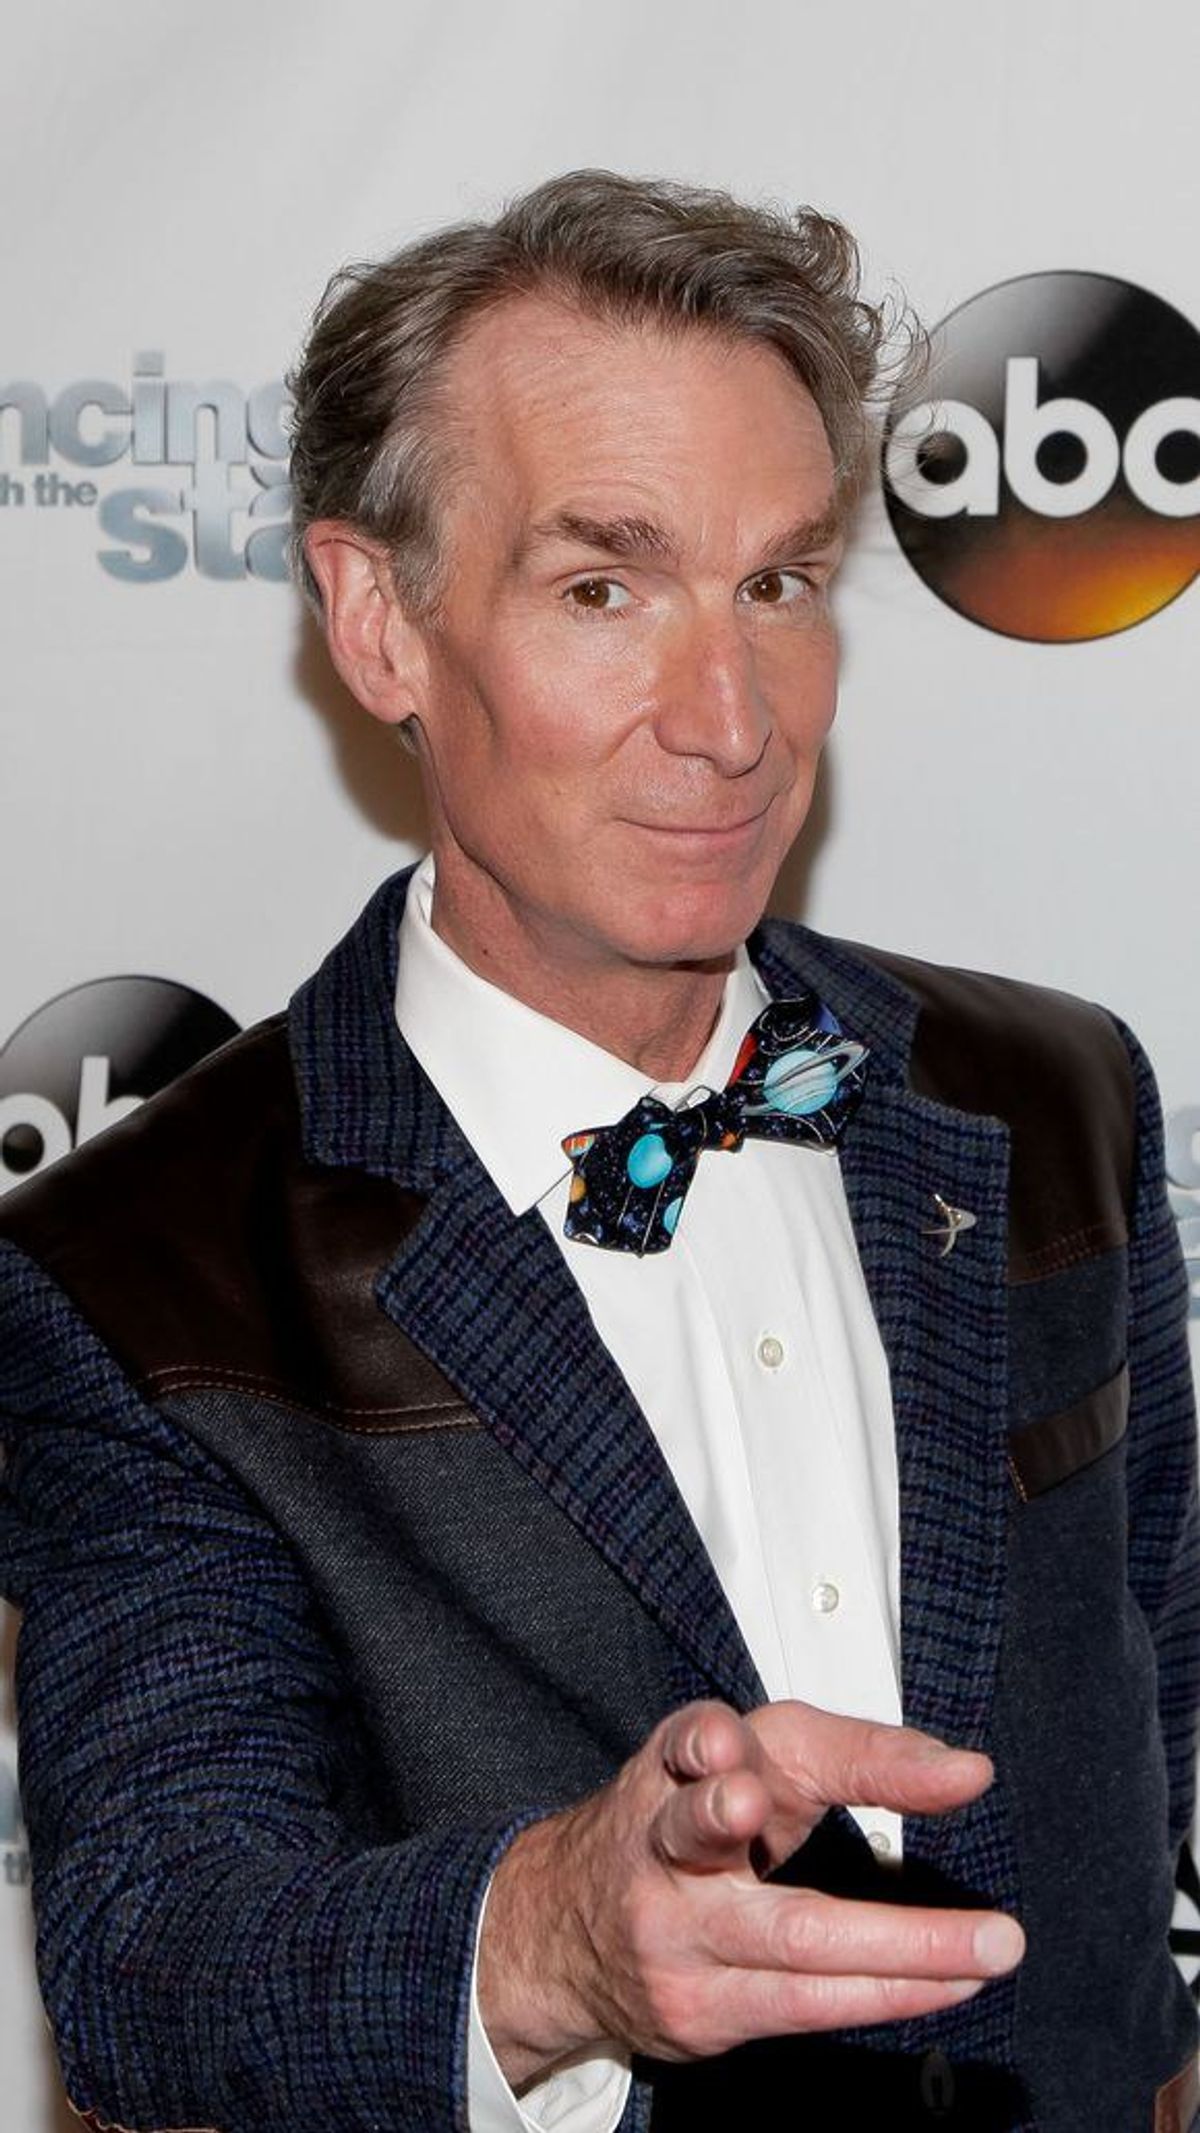 11 Reasons Why Bill Nye Is Still Super Cool